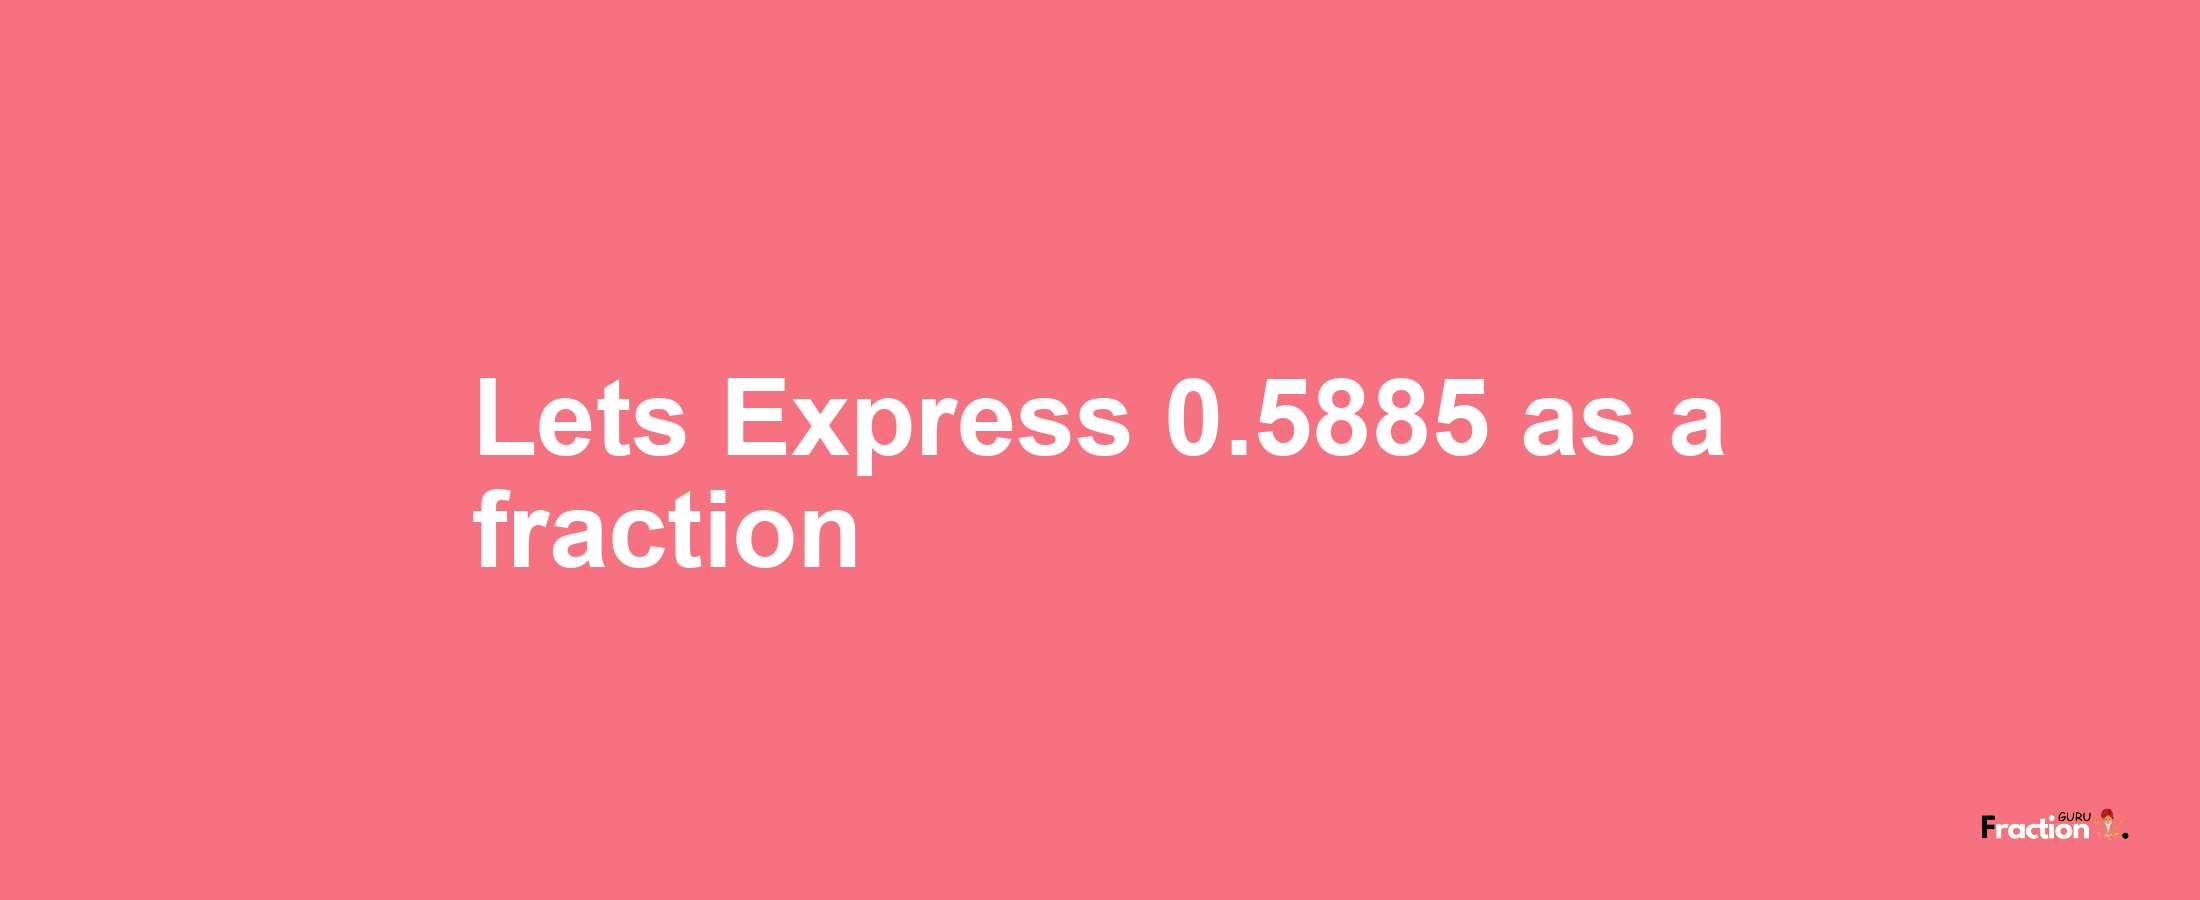 Lets Express 0.5885 as afraction